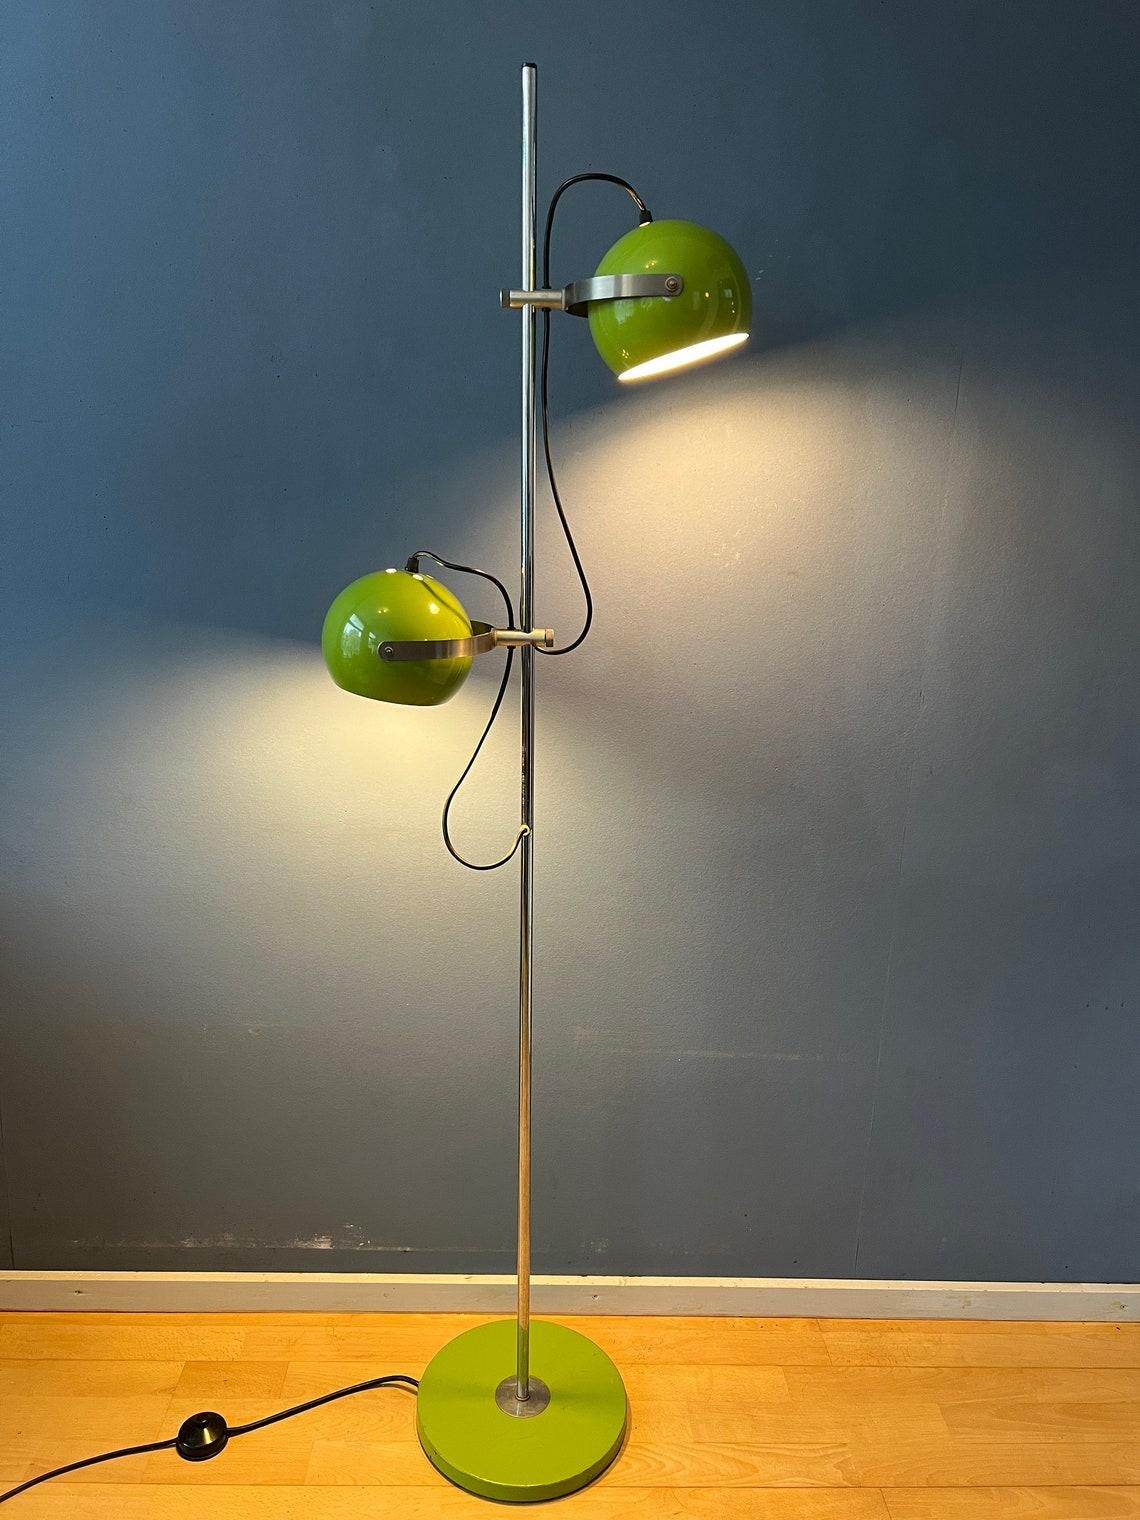 A beautiful mid century Herda eyeball floor lamp in apple green colour. The metal shades can be turned in any way desirable and moved up and down the base. The lamp requires two E27/26 lightbulbs and currently has a EU-plug (directly usable outside